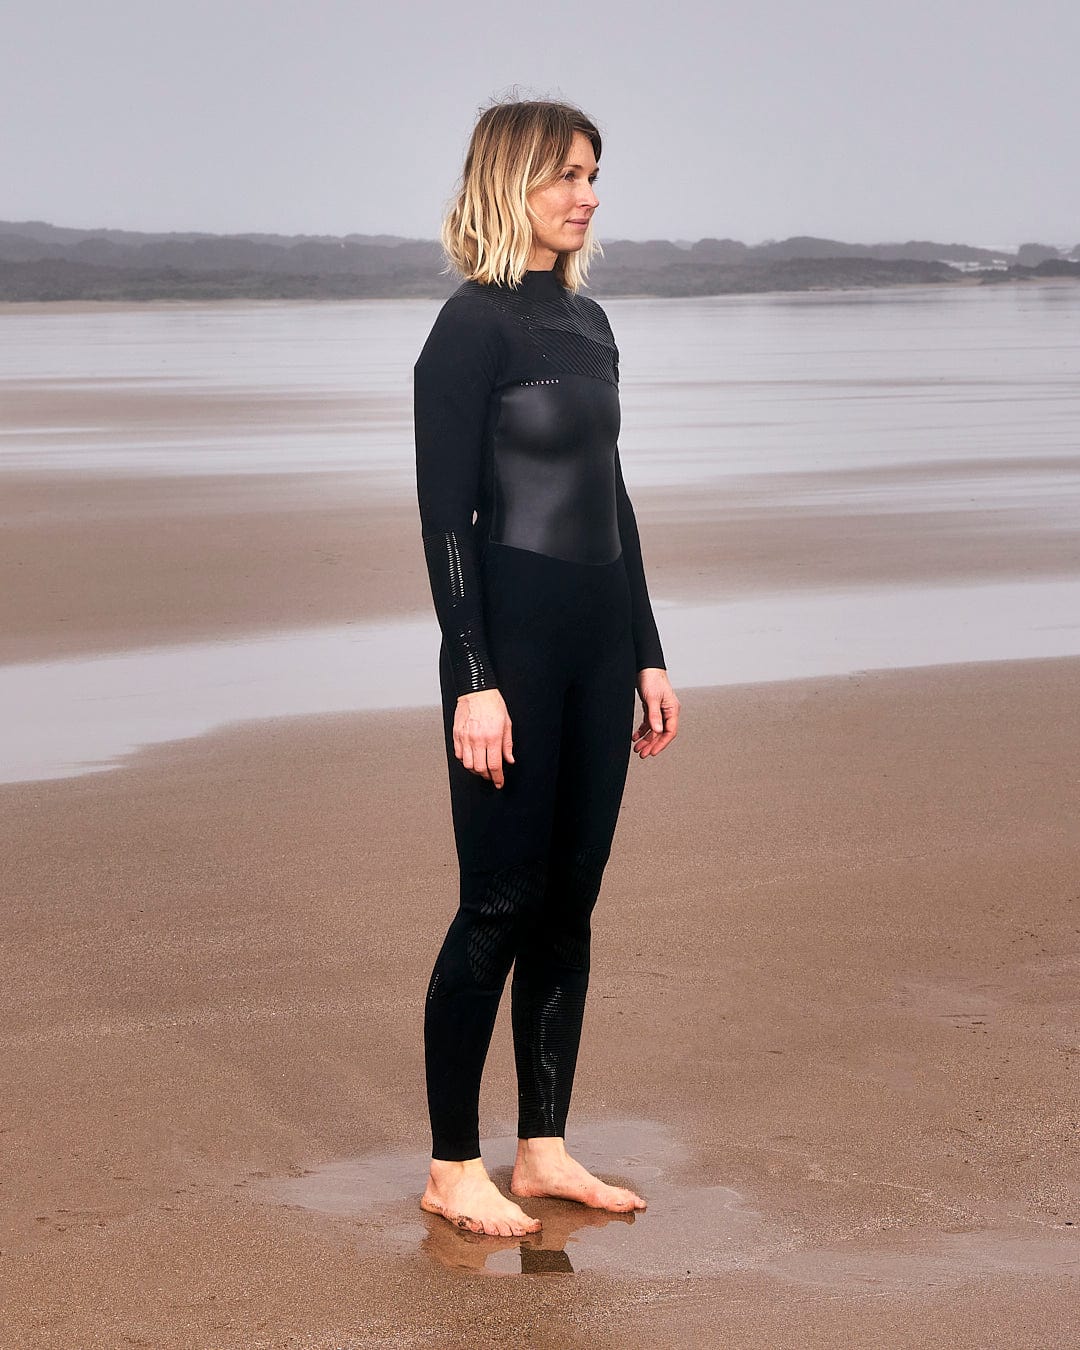 A woman in a Saltrock Shockwave - Womens 3/2 Front Zip Full Wetsuit - Black standing on the beach.